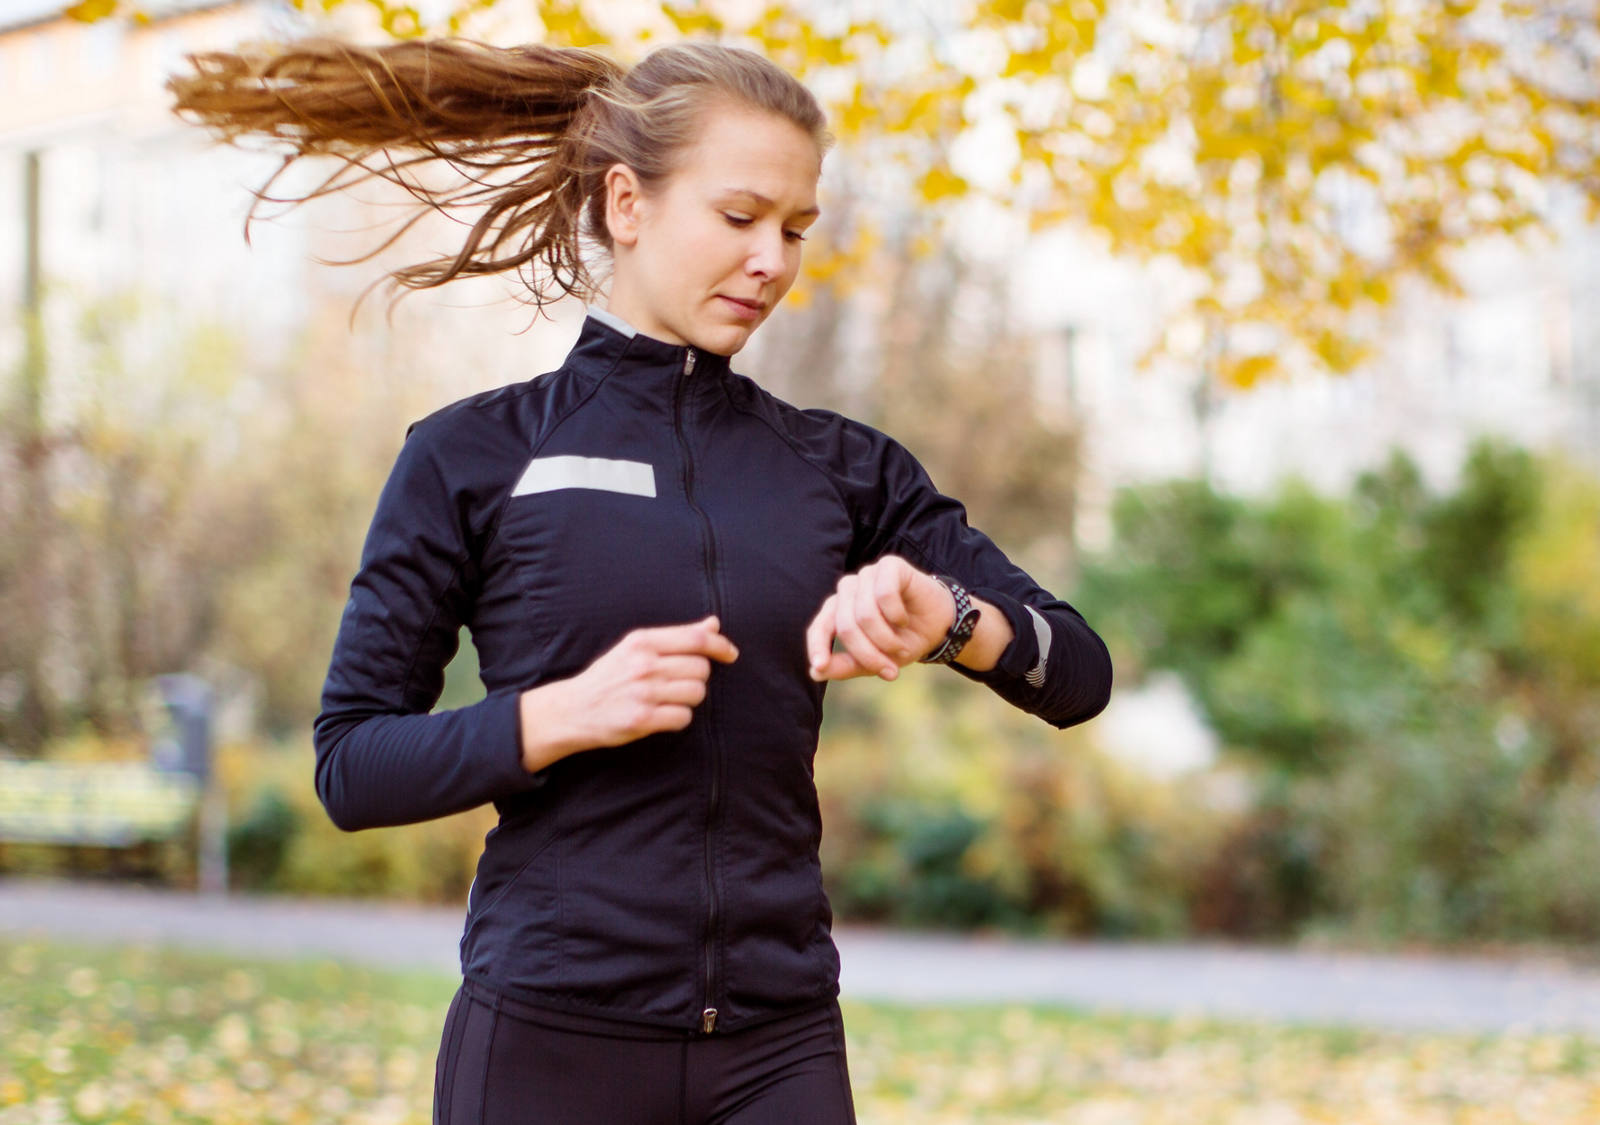 Jogging for beginners: key tips for all age groups